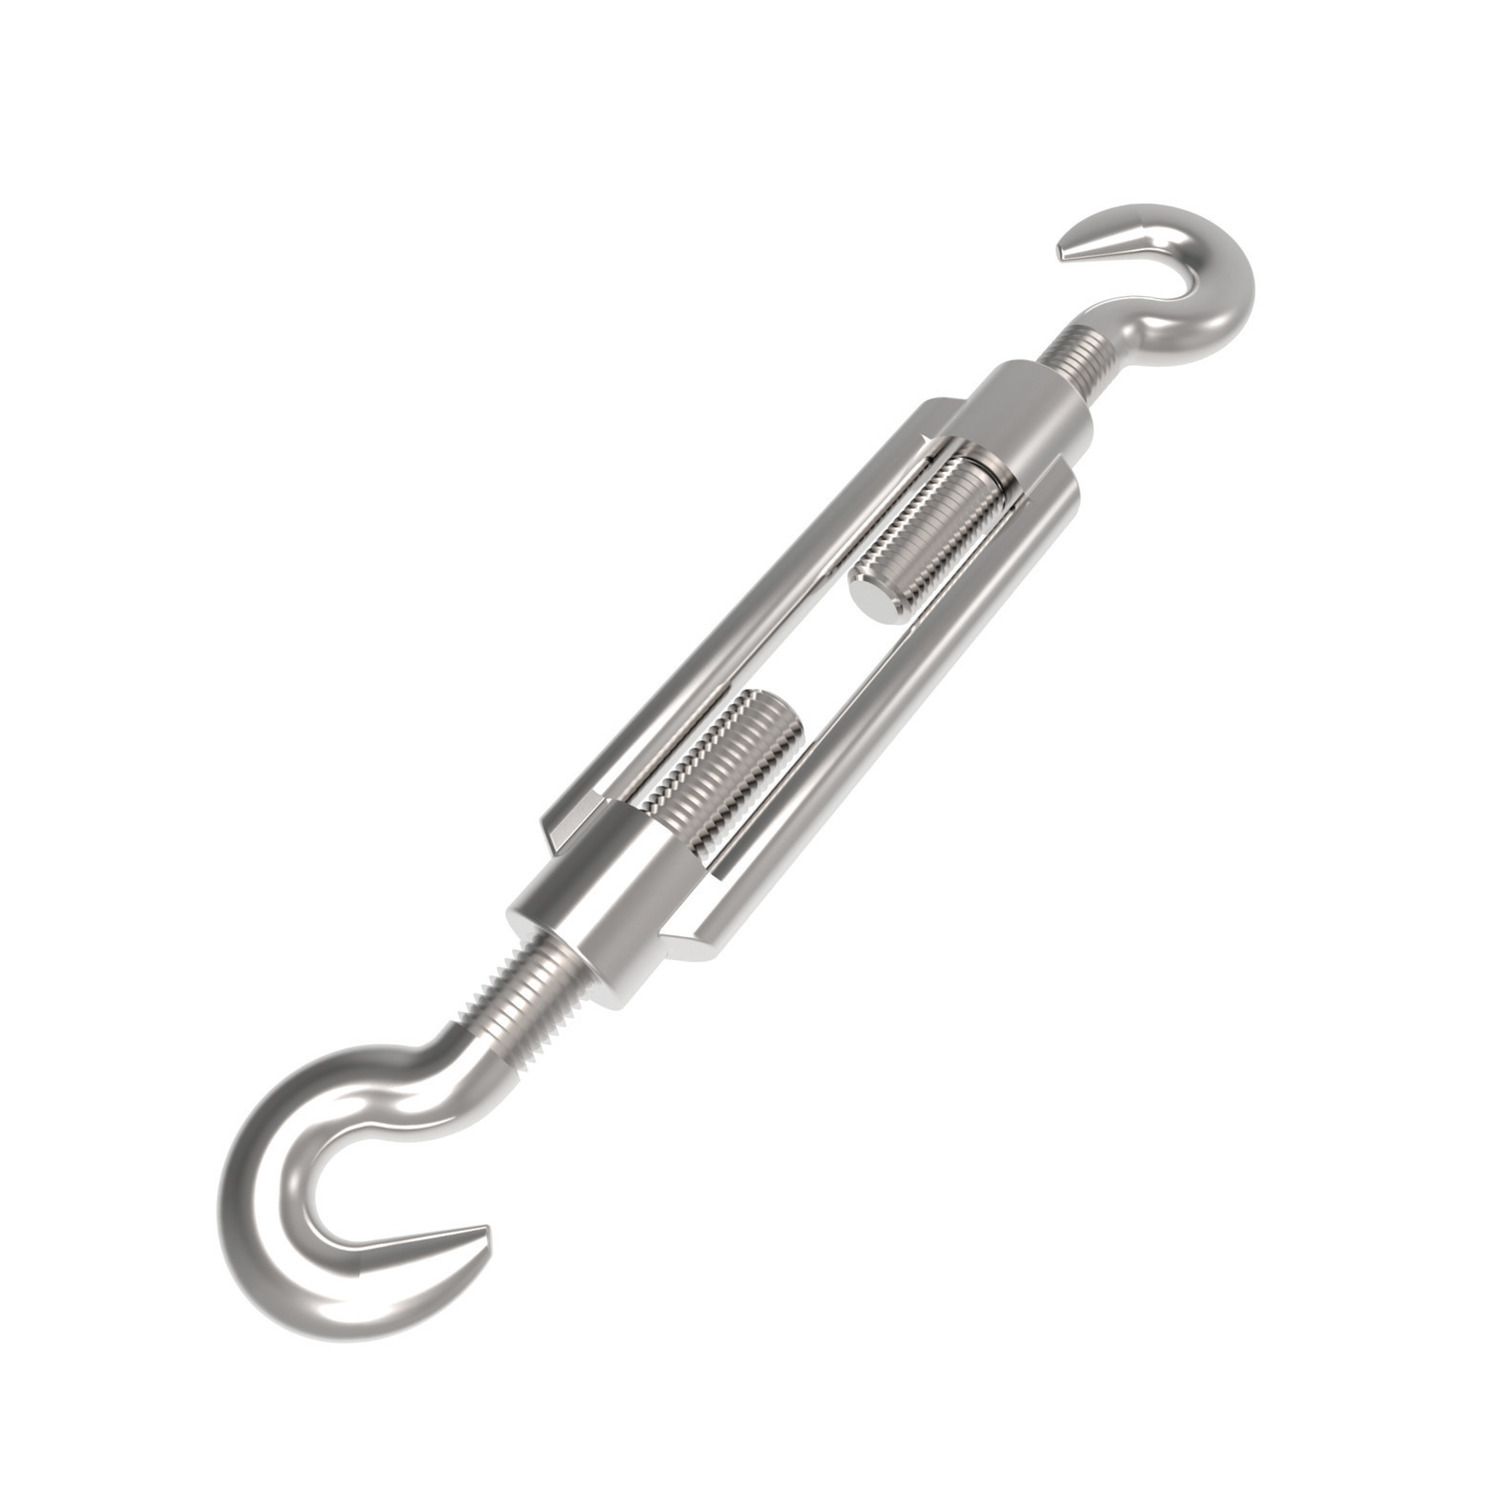 Hook End Turnbuckles Steel turnbuckles manufactured to DIN 1480 hook to hook. Sizes ranging from M6 to M36. Lengths from 110mm to 295mm.